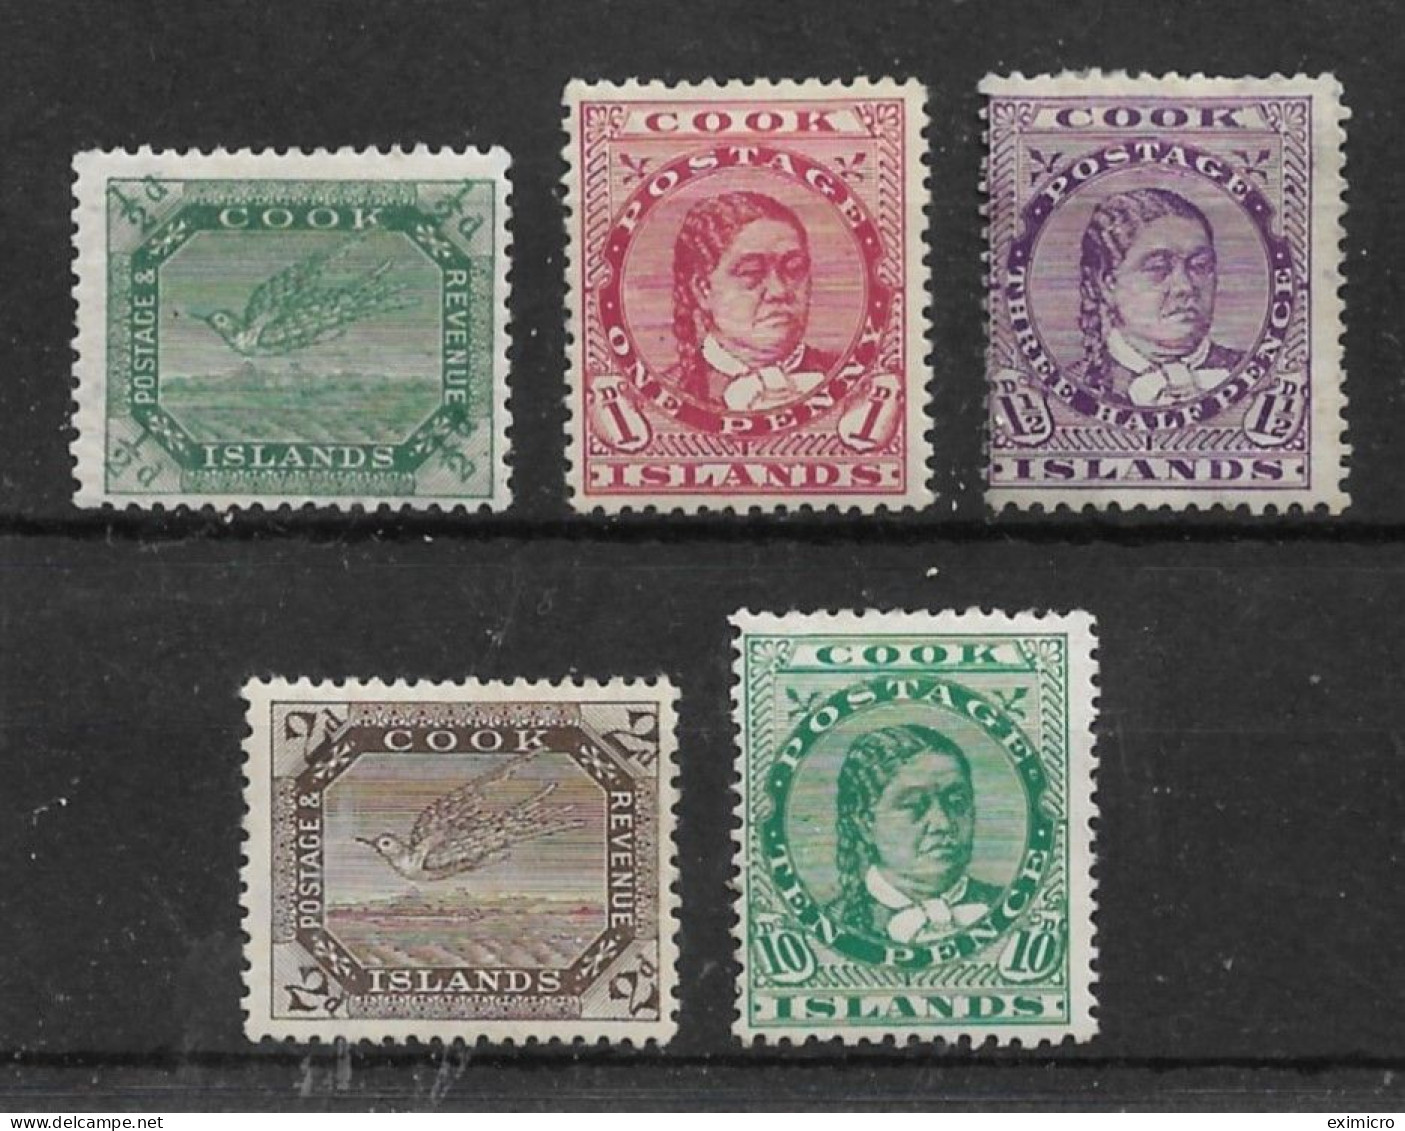 COOK ISLANDS 1913 - 1919 VALUES TO 10d SG 39a, 41, 43, 44, 45 MOUNTED MINT Cat £96 - Cookinseln